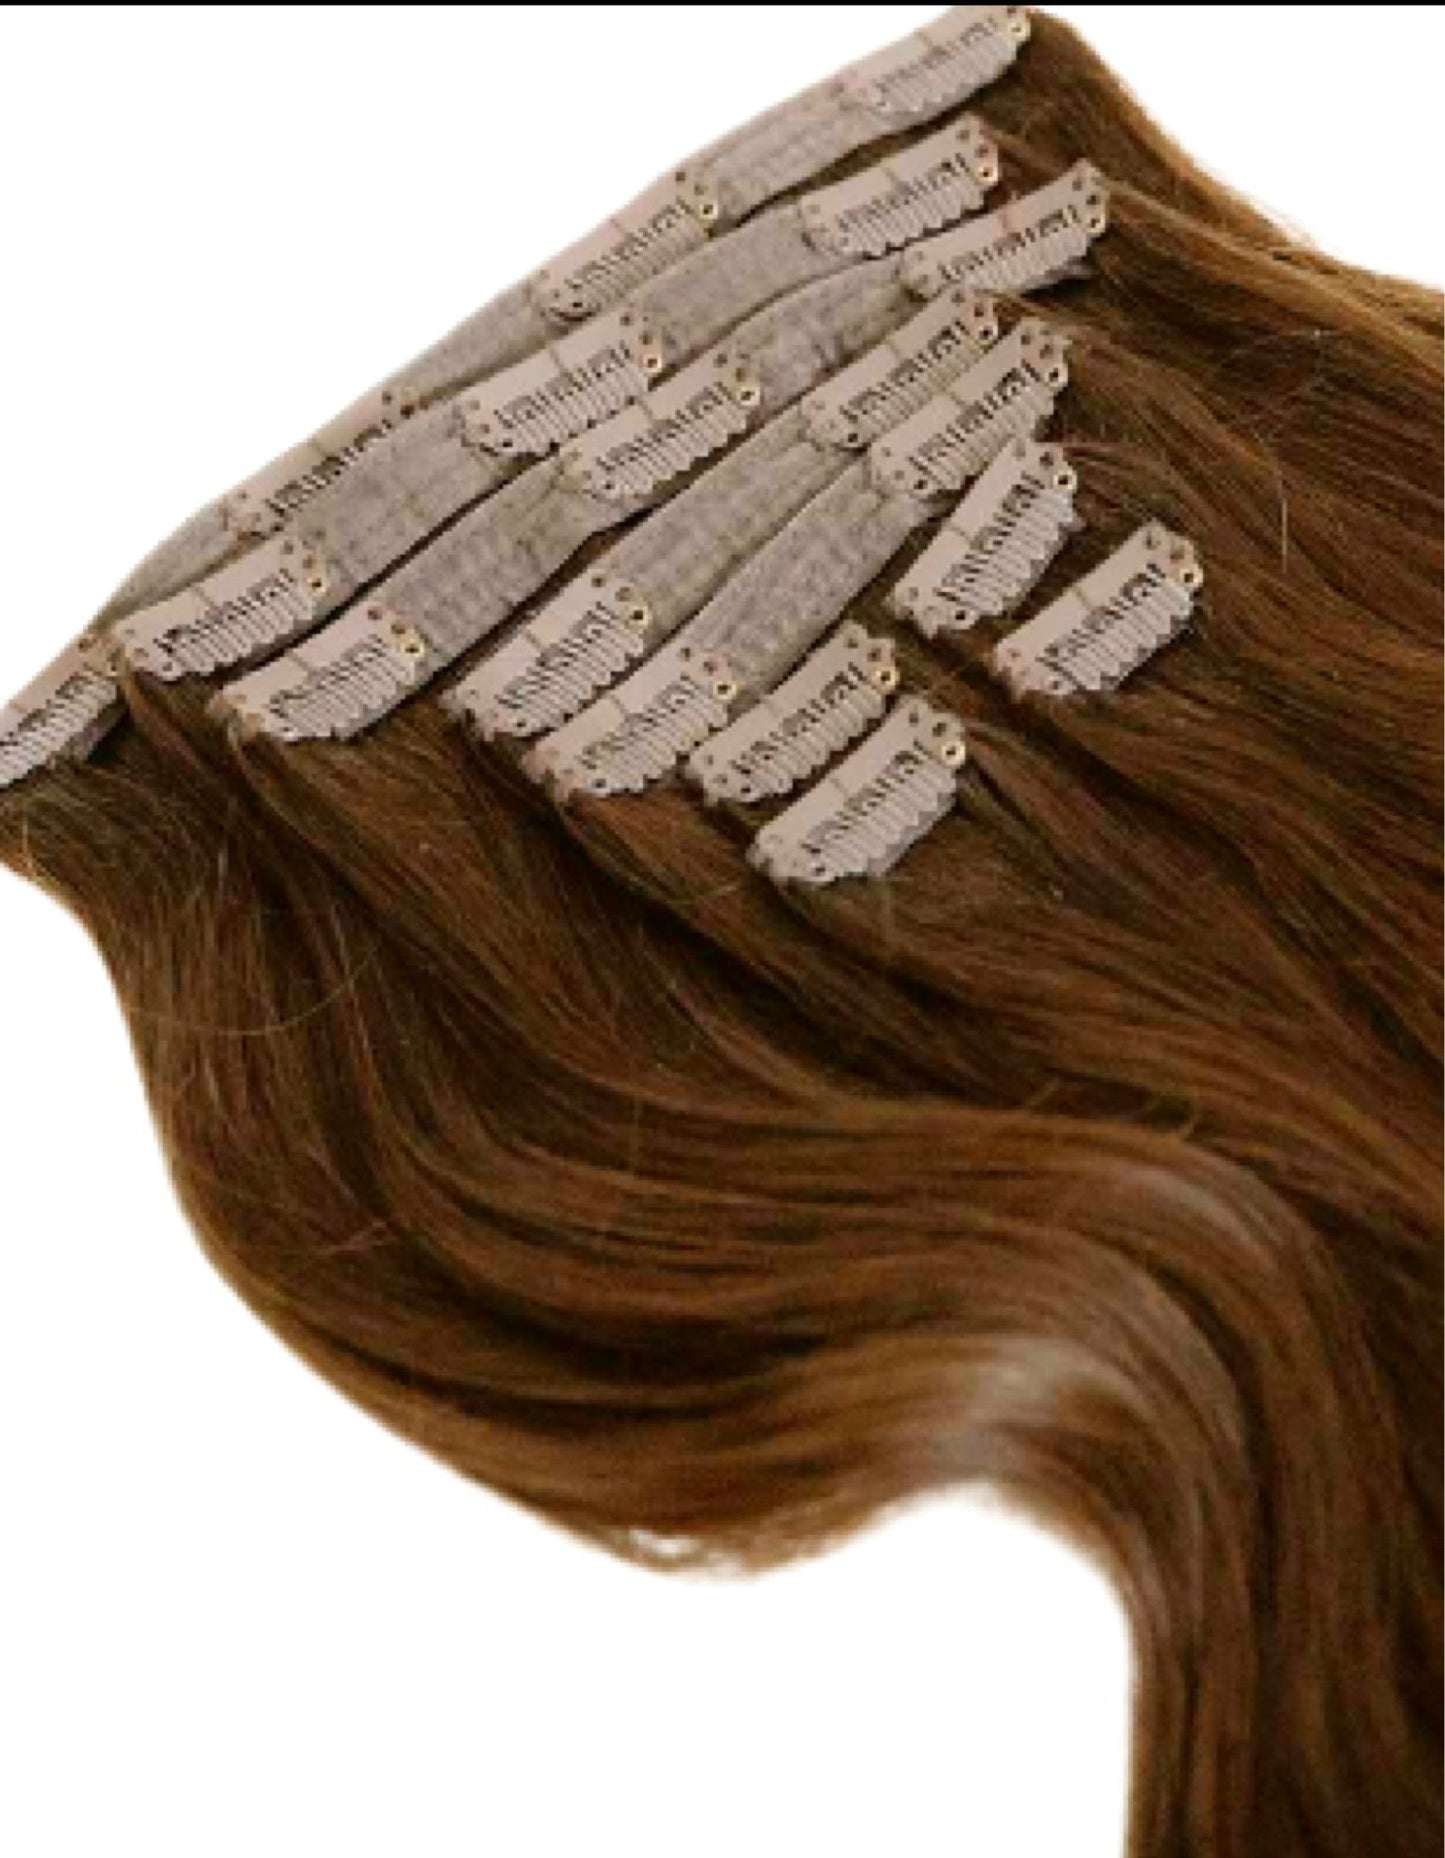 RETAIL CLIP IN EXTENSIONS - HIGHLIGHTED - MOCHA QUEEN